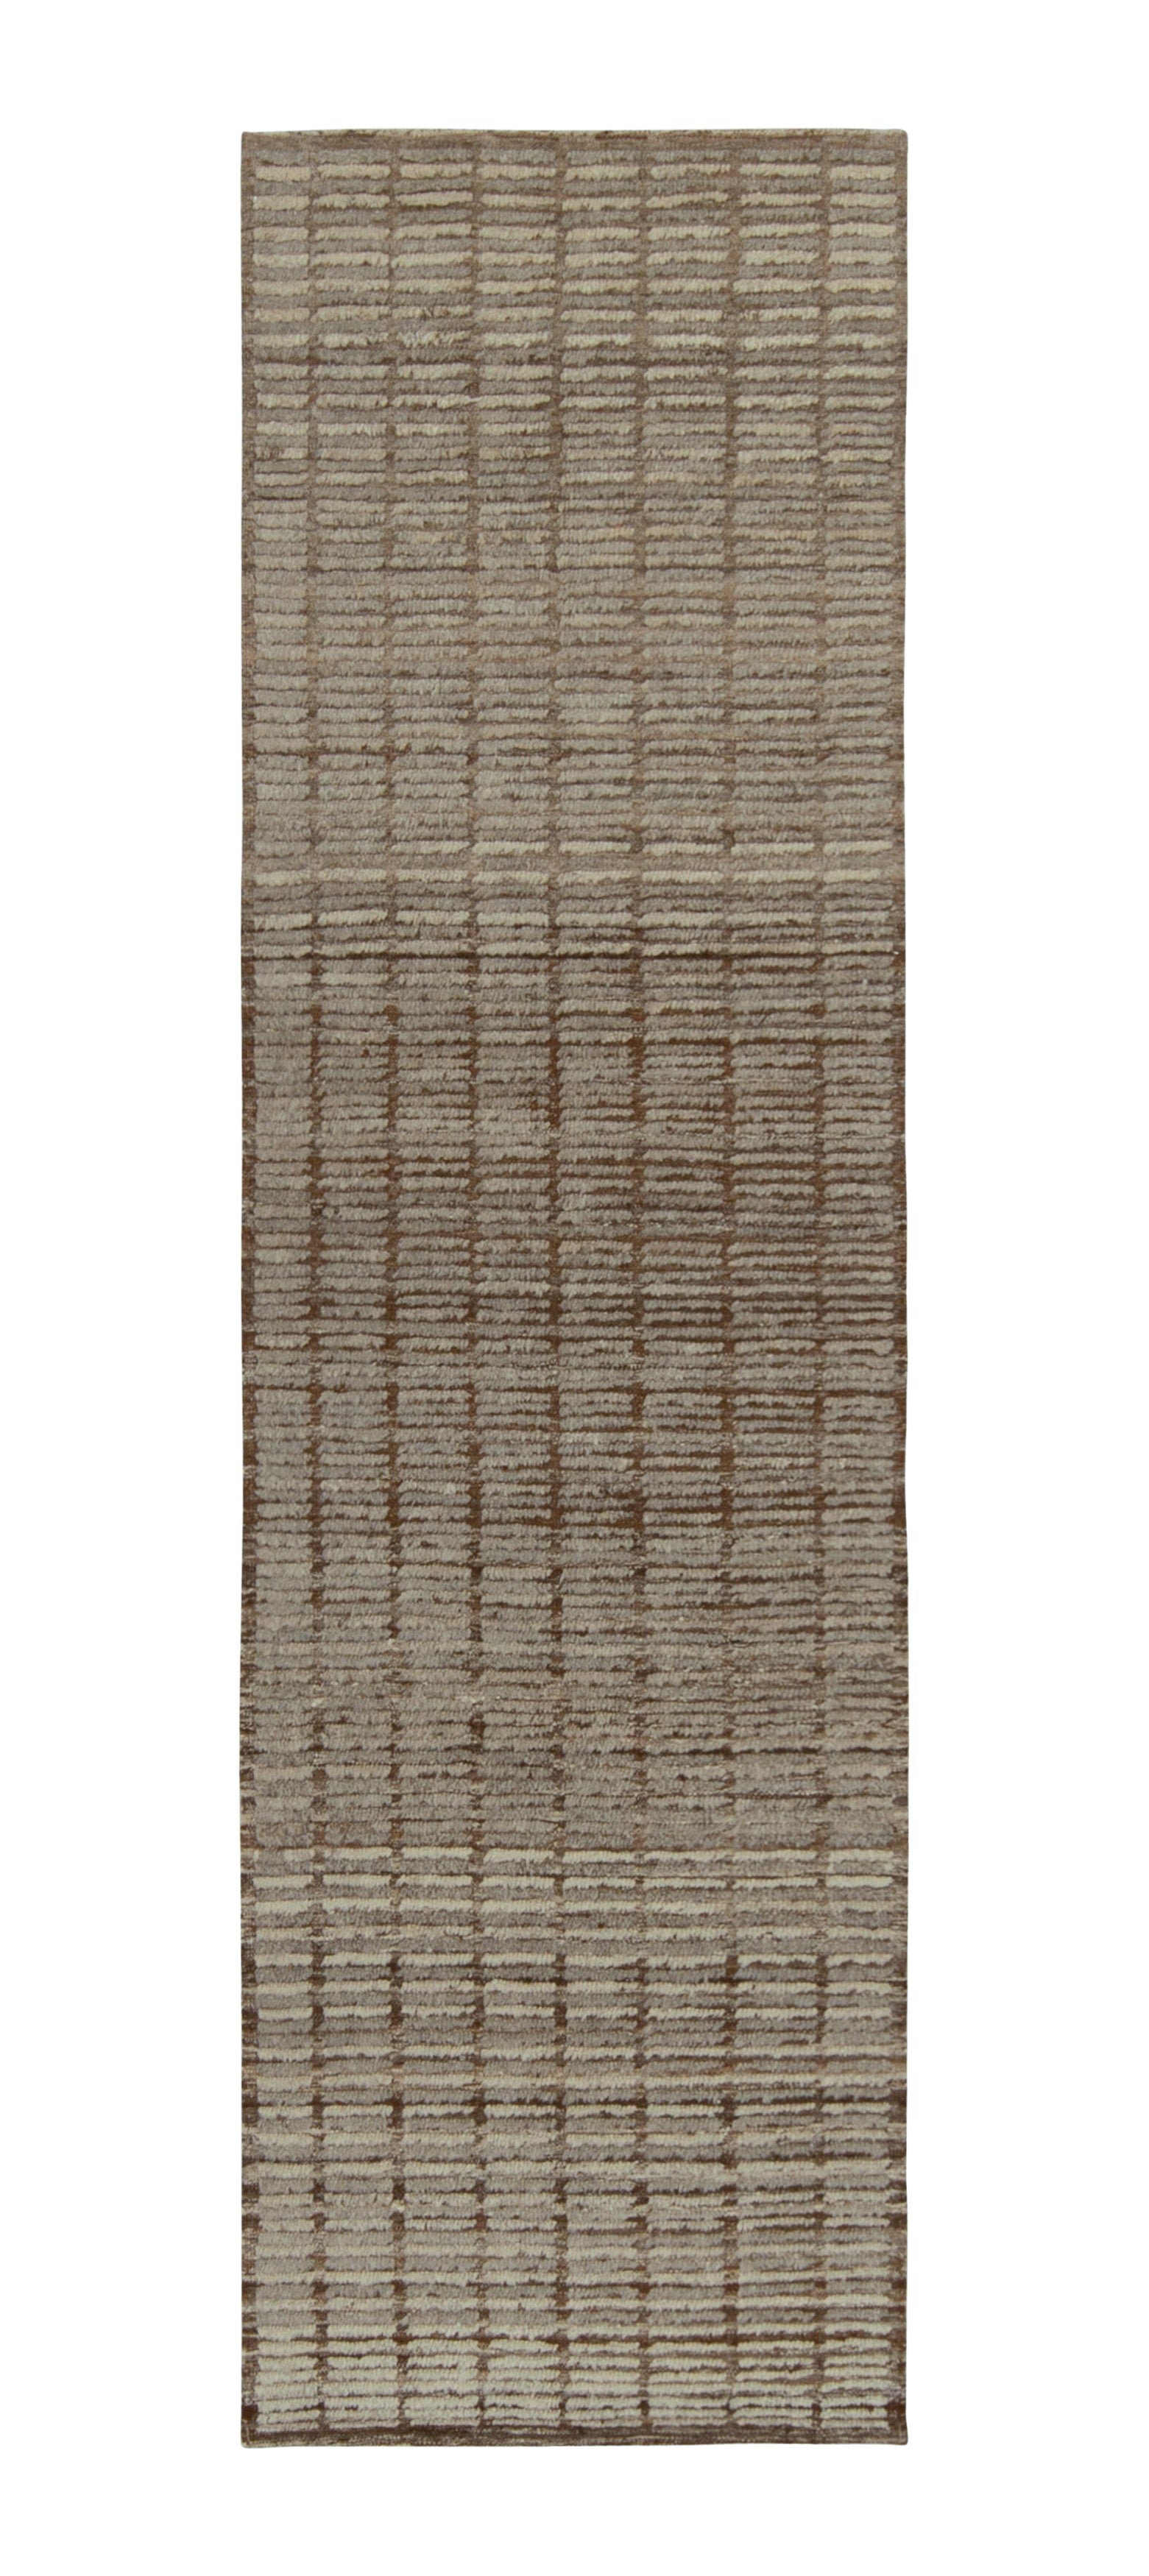 Rug & Kilim's Moroccan Style Runner in Brown & Gray High-Low Striations